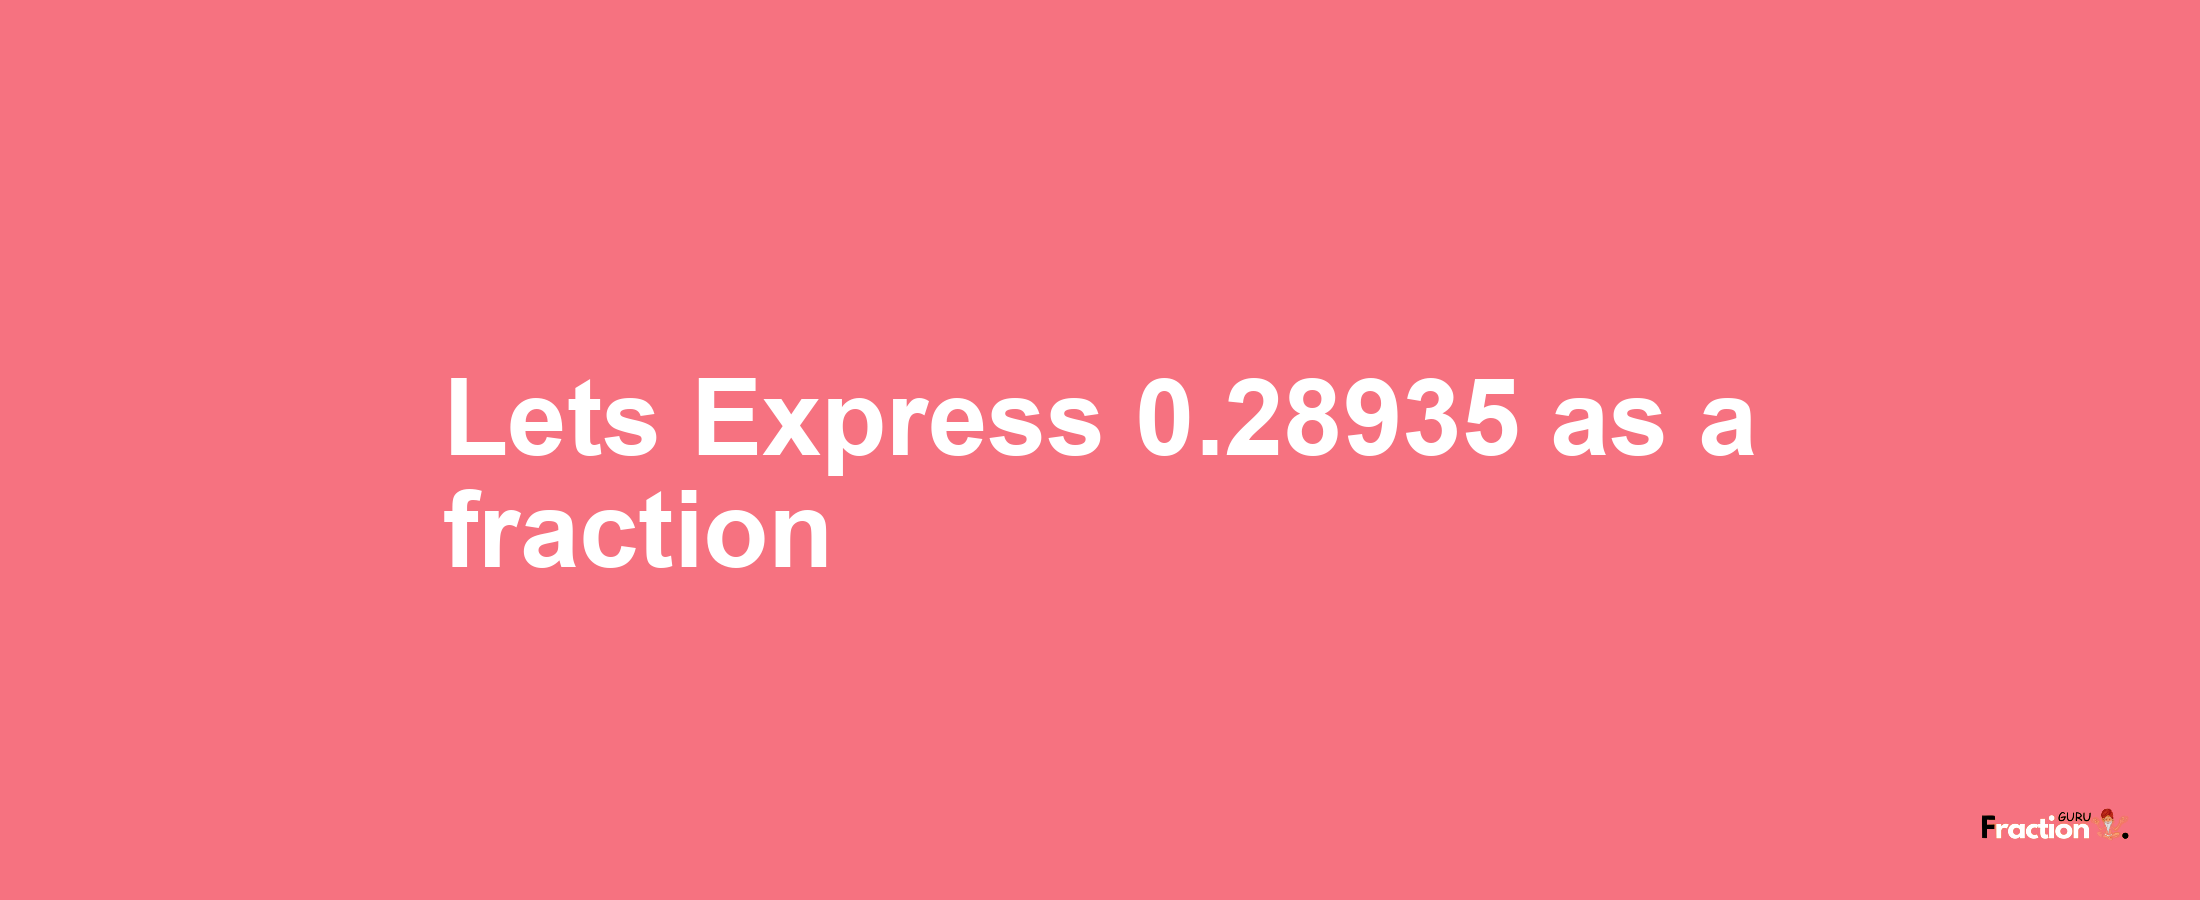 Lets Express 0.28935 as afraction